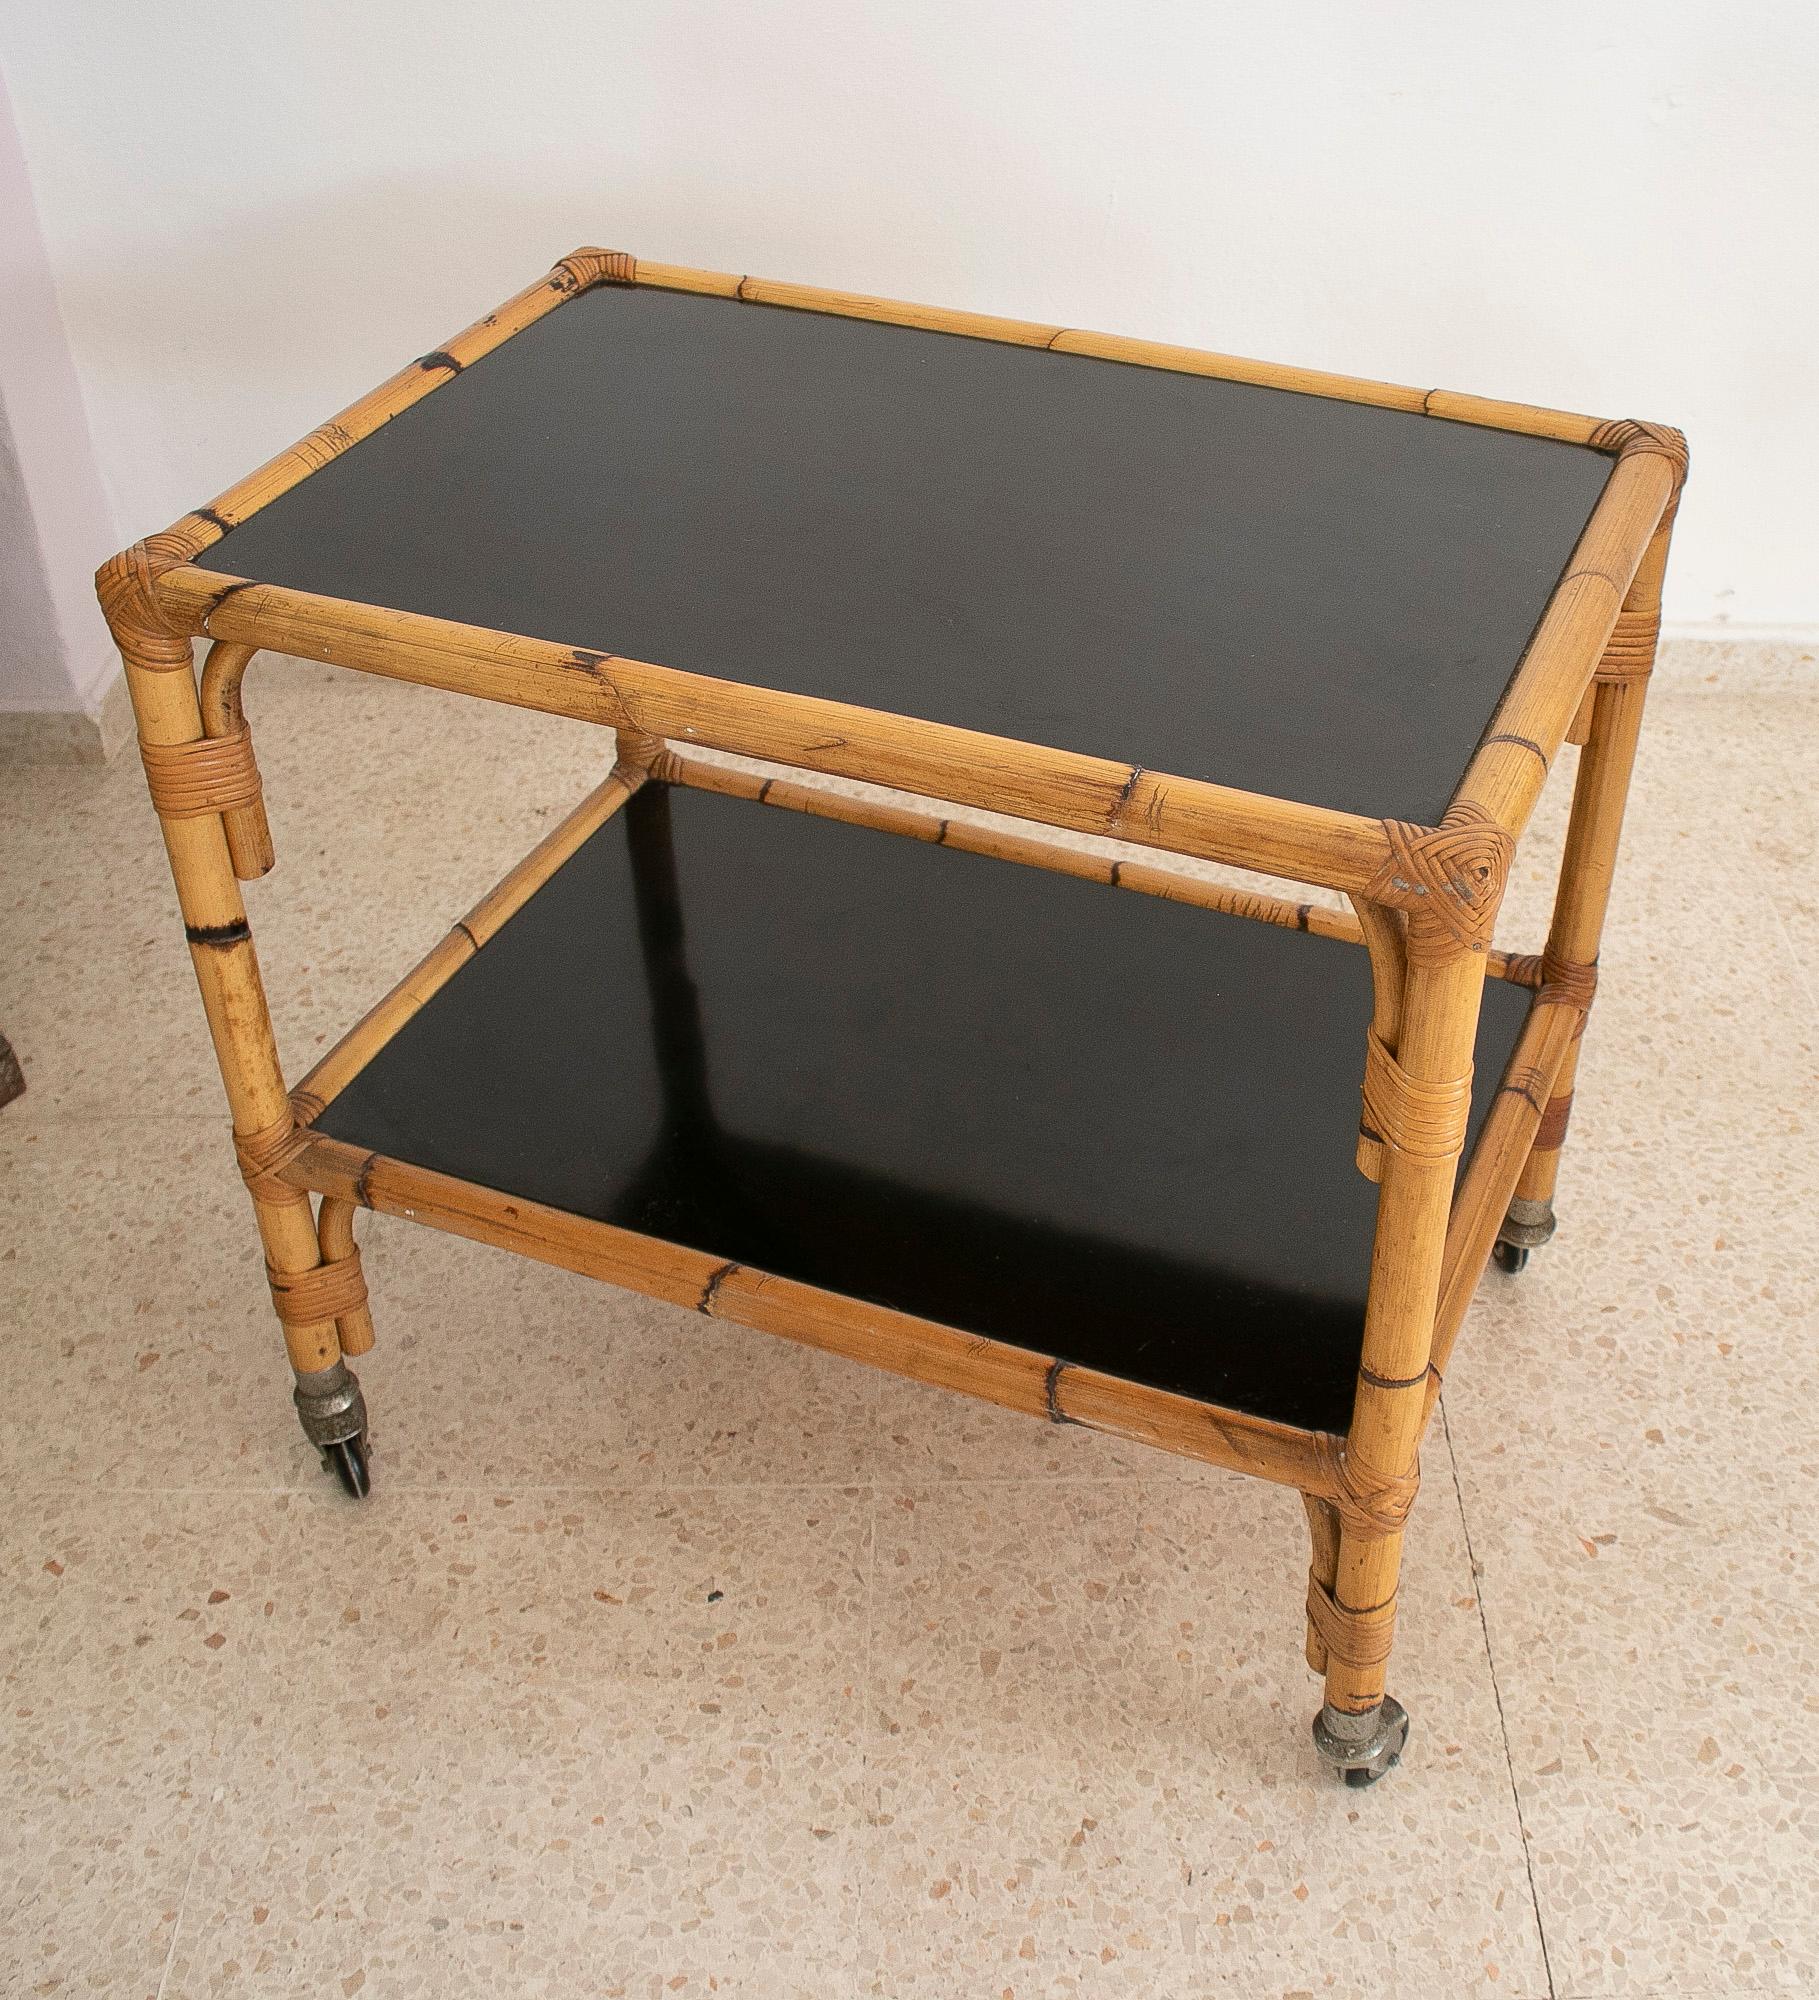 1970s Spanish Bamboo 2-Shelves Trolley w/ Smoked Glass Panels For Sale 1